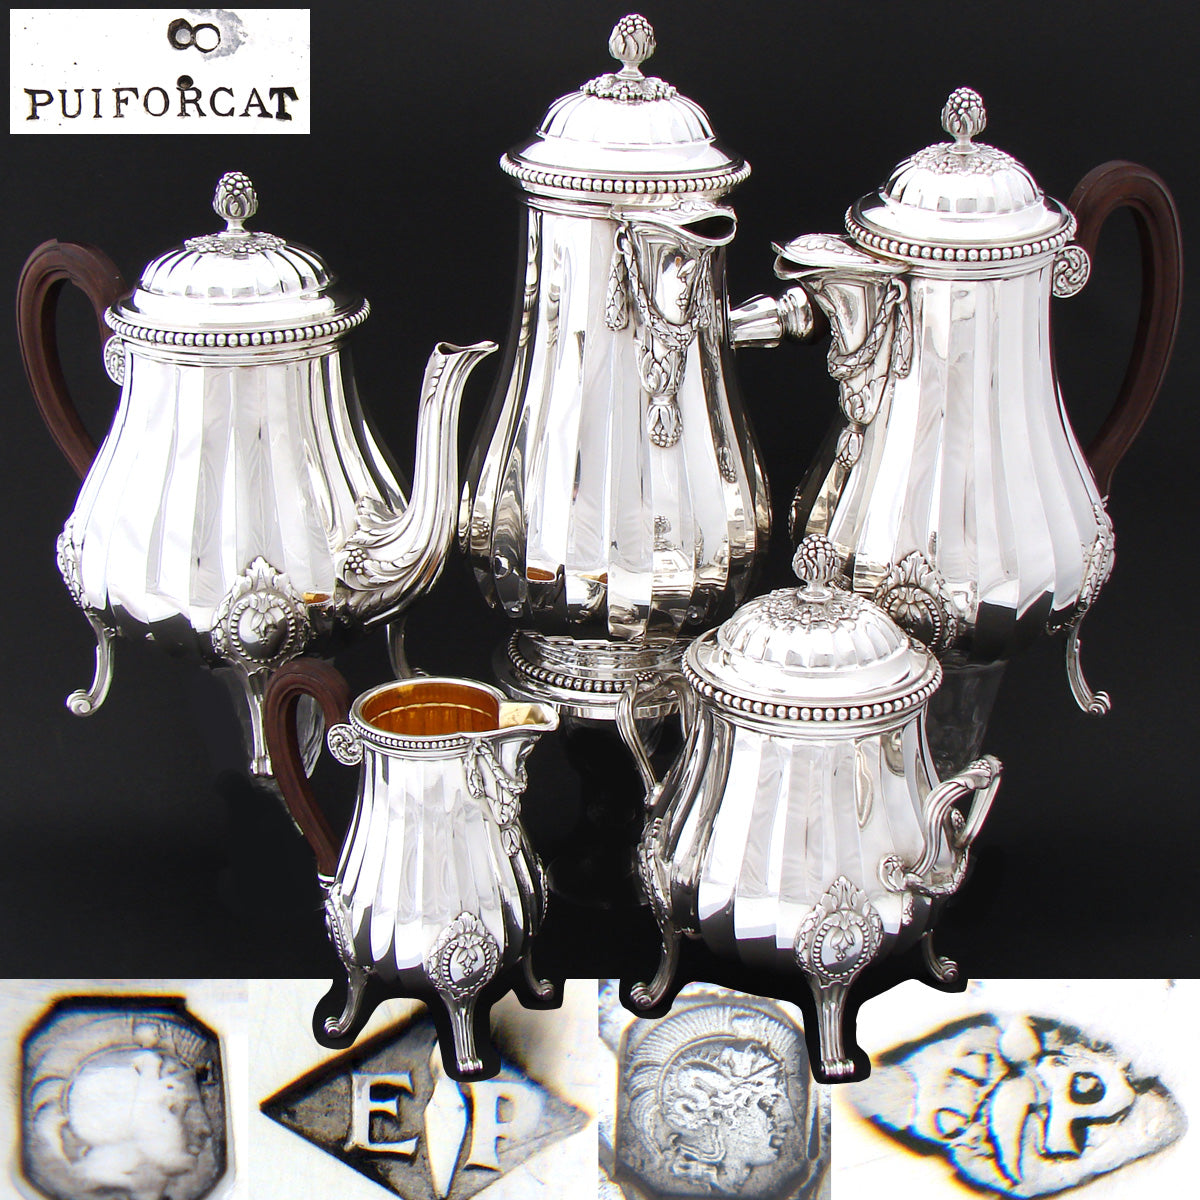 Antique French PUIFORCAT Sterling Silver 5pc Coffee & Tea Service, Set, Laurel Garland, Fluted Bodies